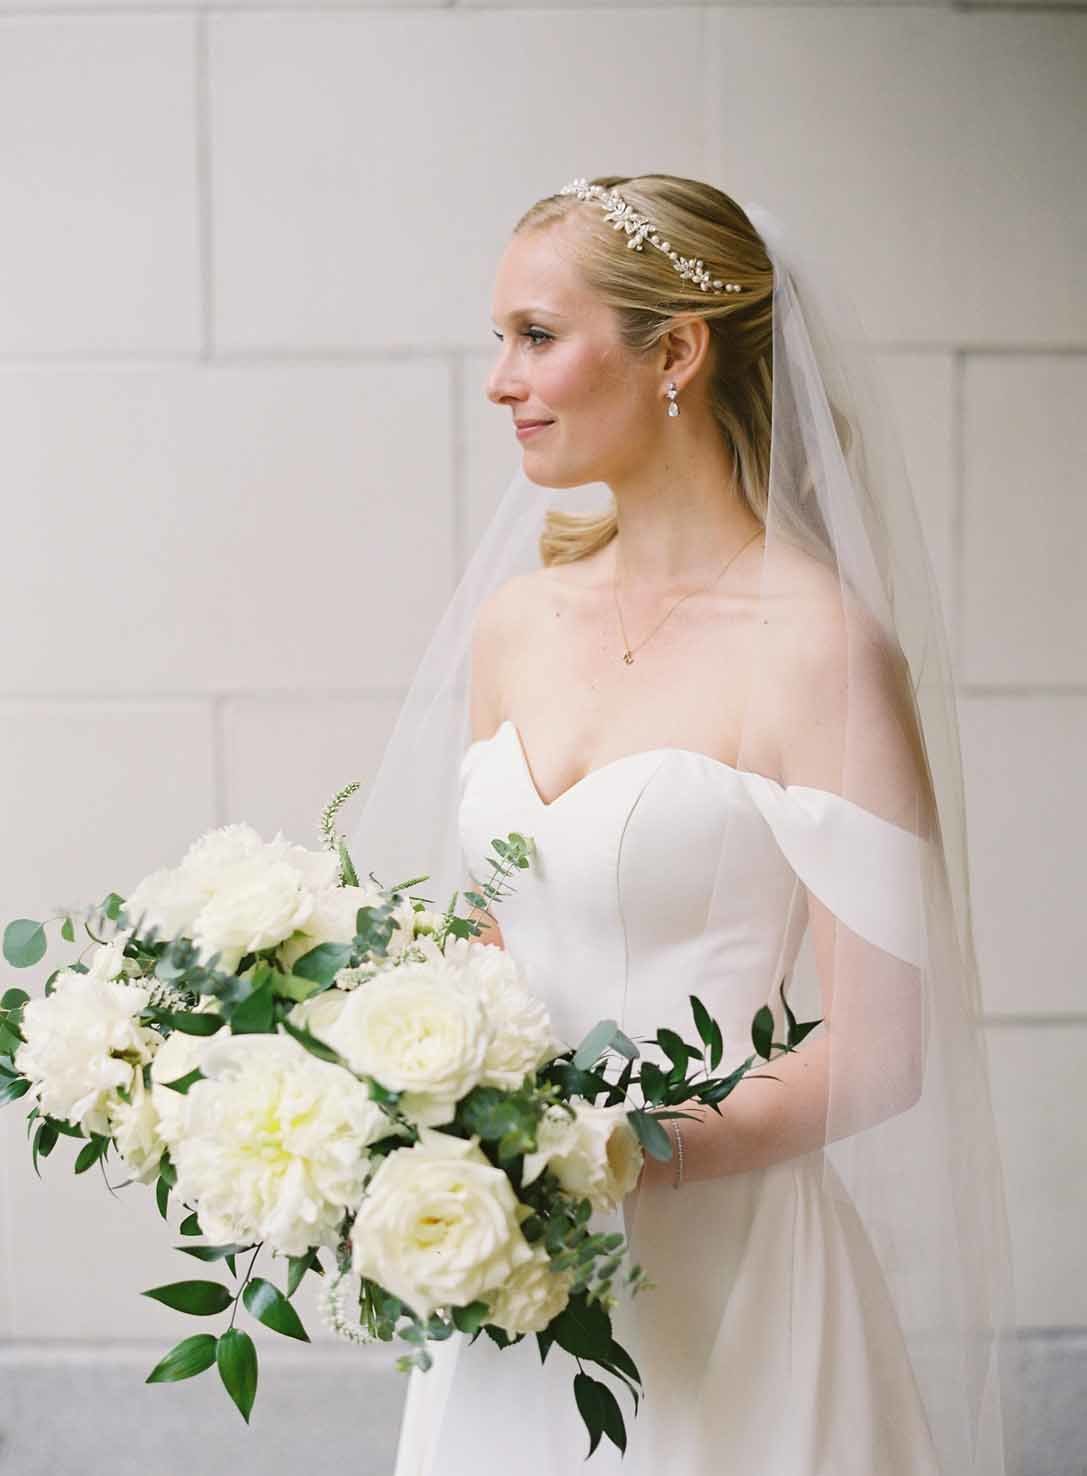 bride holding a large bridal bouquet of white garden roses